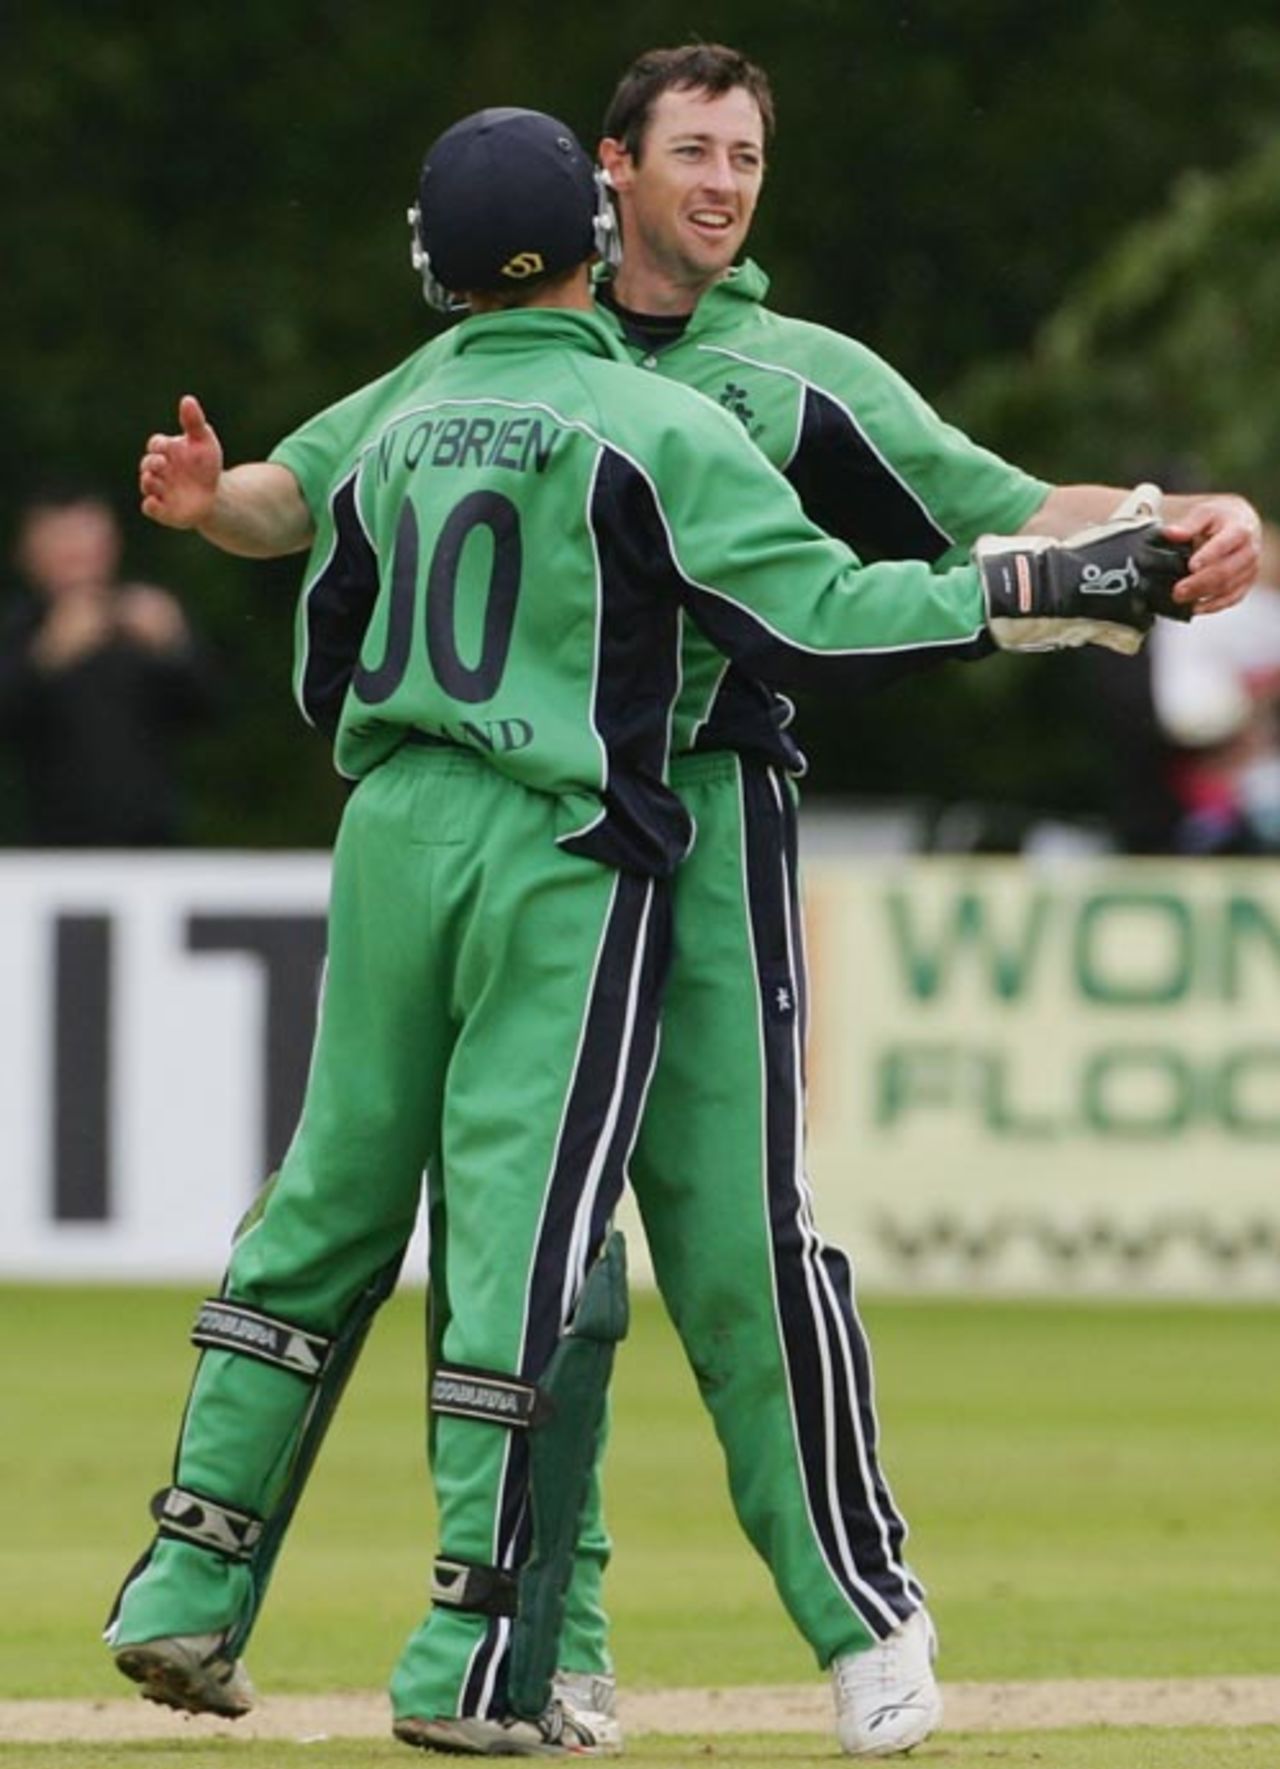 Alex Cusack and Niall O'Brien are delighted to see the back of Herschelle Gibbs, Ireland v South Africa, Belfast, One-off ODI, June 24, 2007